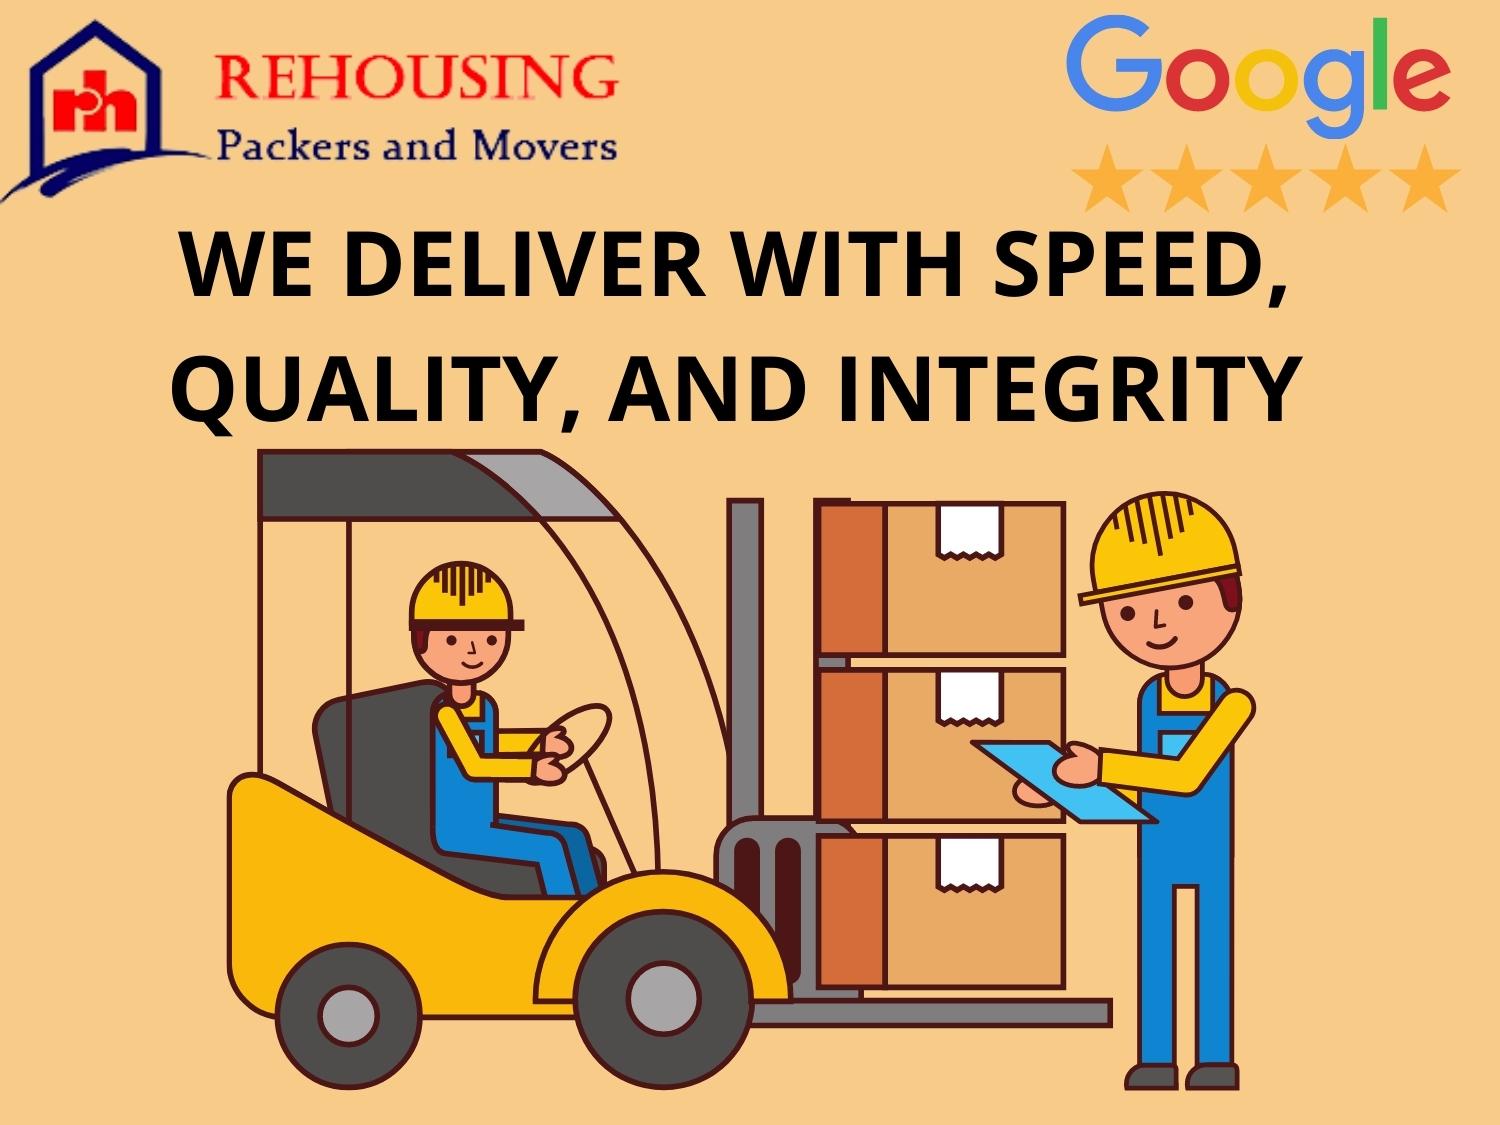 Courier services from Surat to Jaipur is dependable and secure, but they do not meet your desire for immediate delivery